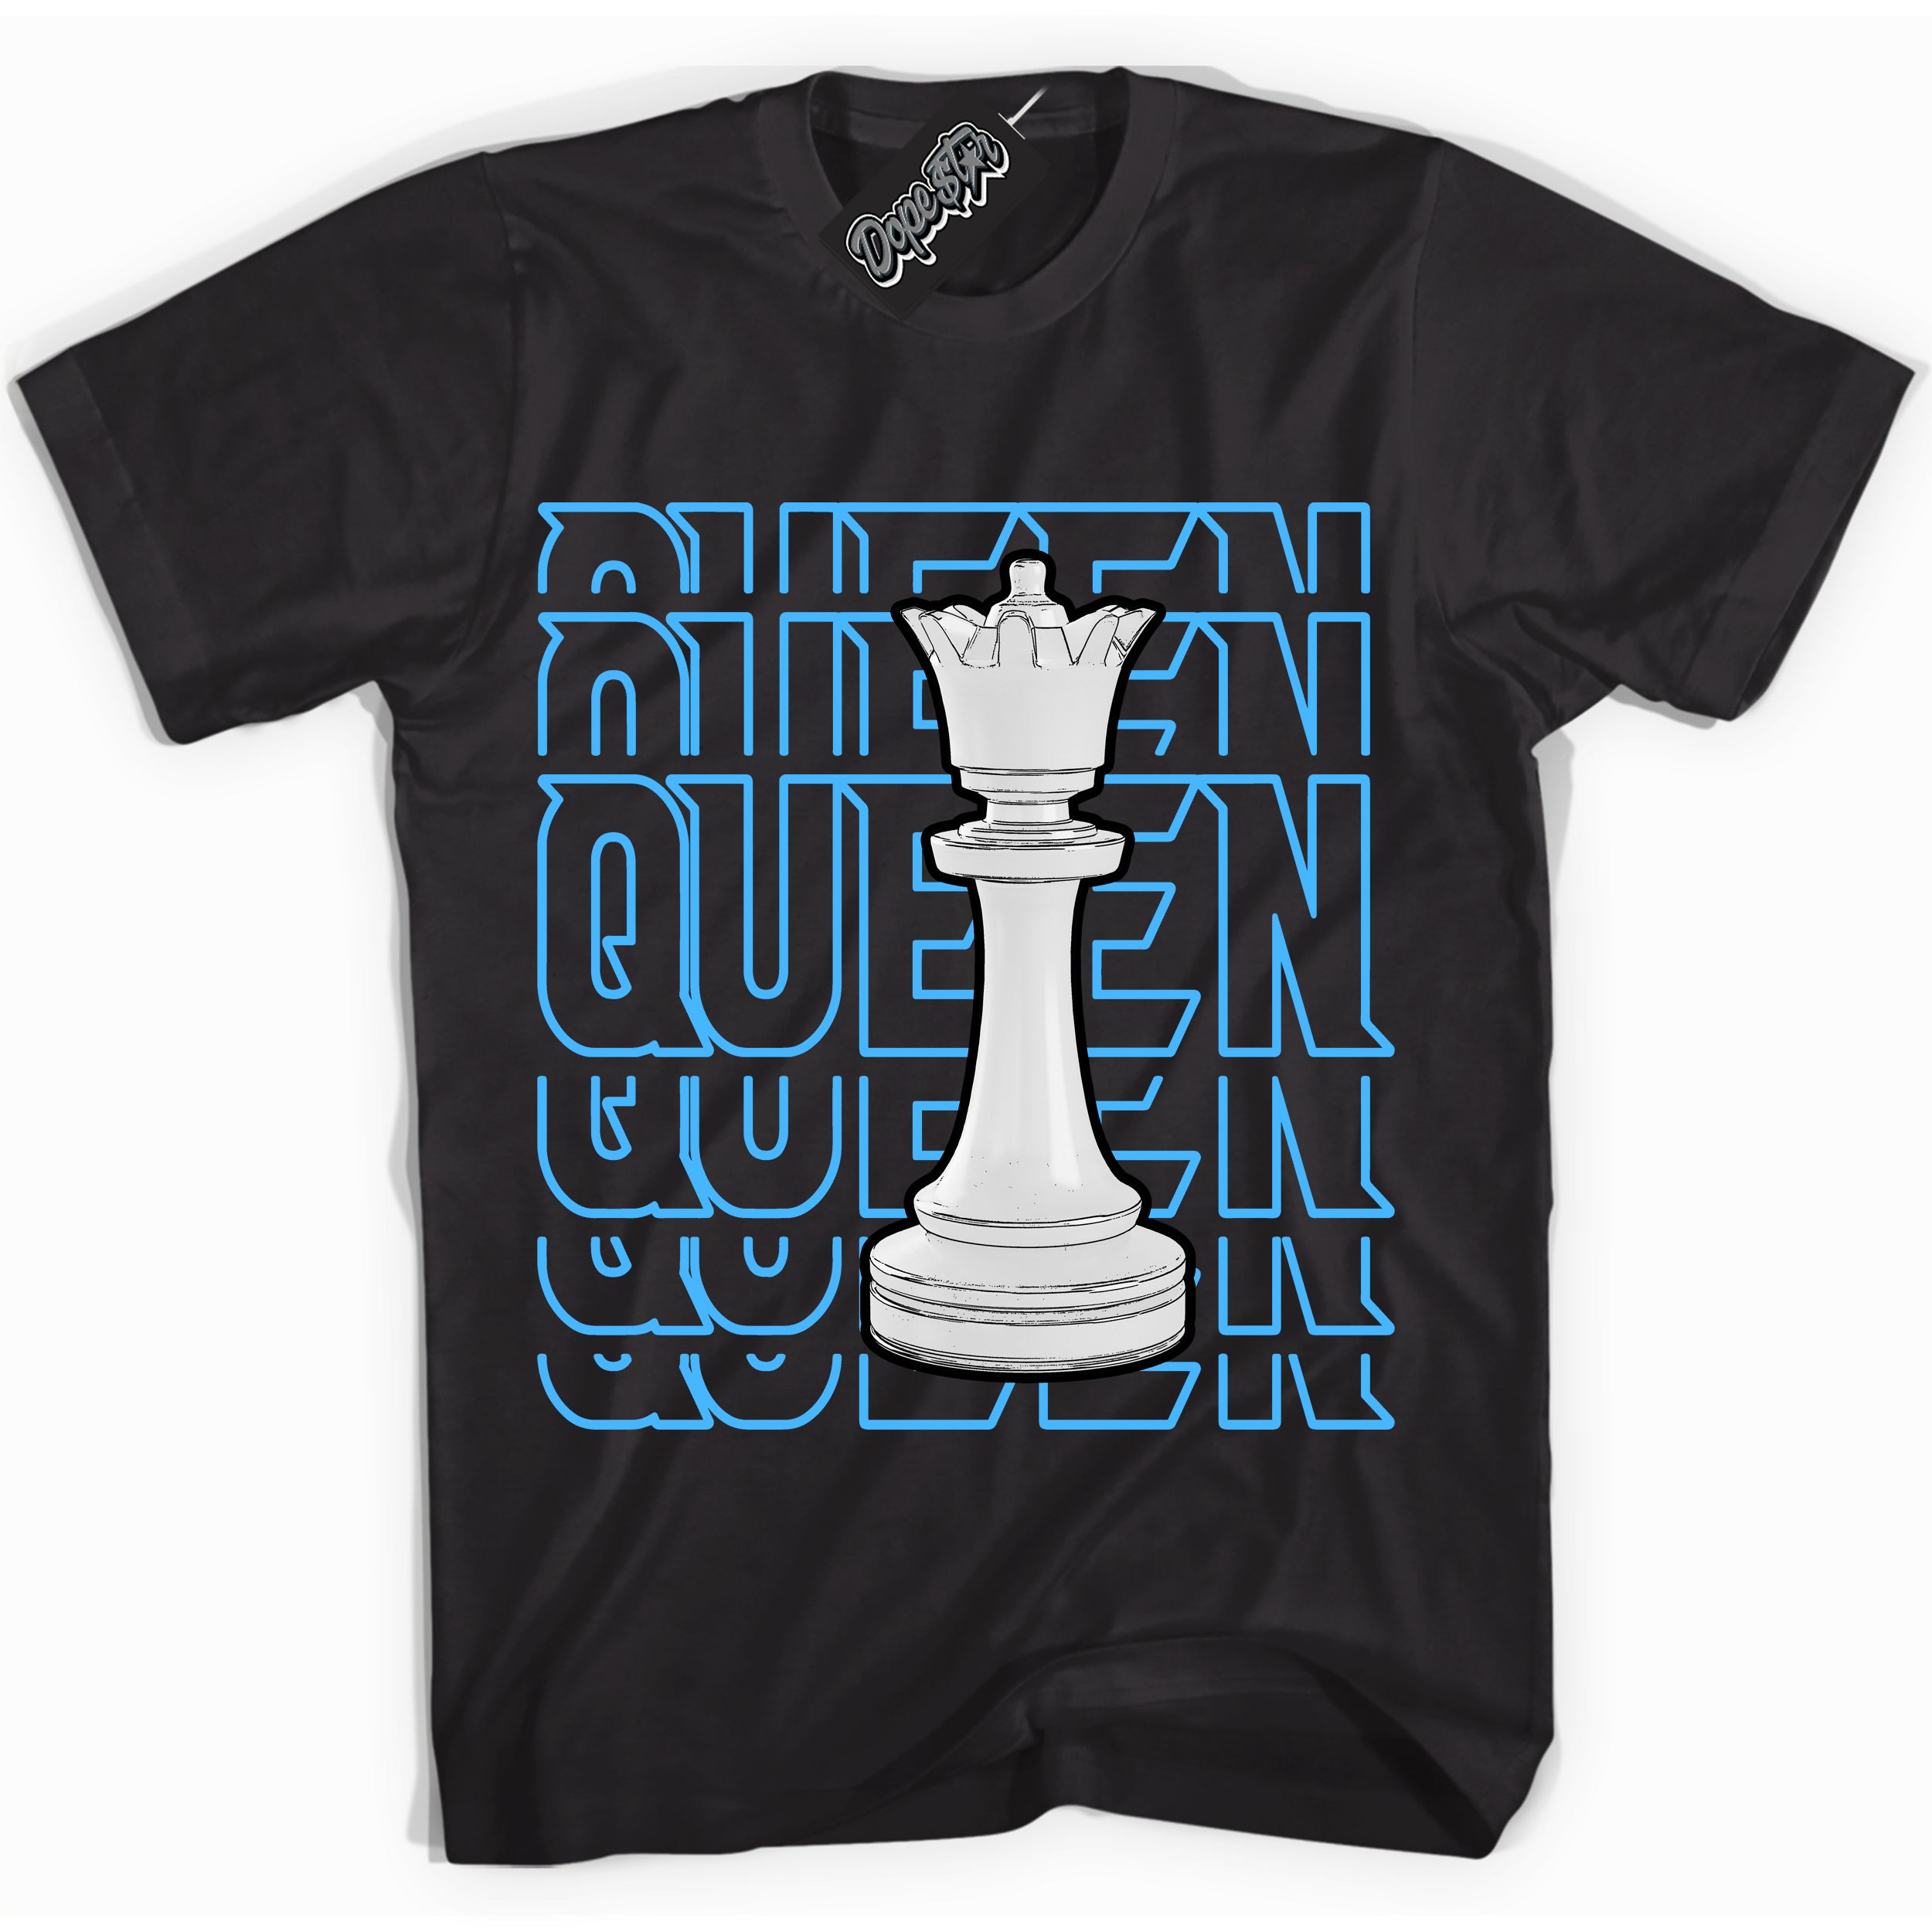 Cool Black graphic tee with “ Queen Chess ” design, that perfectly matches Powder Blue 9s sneakers 